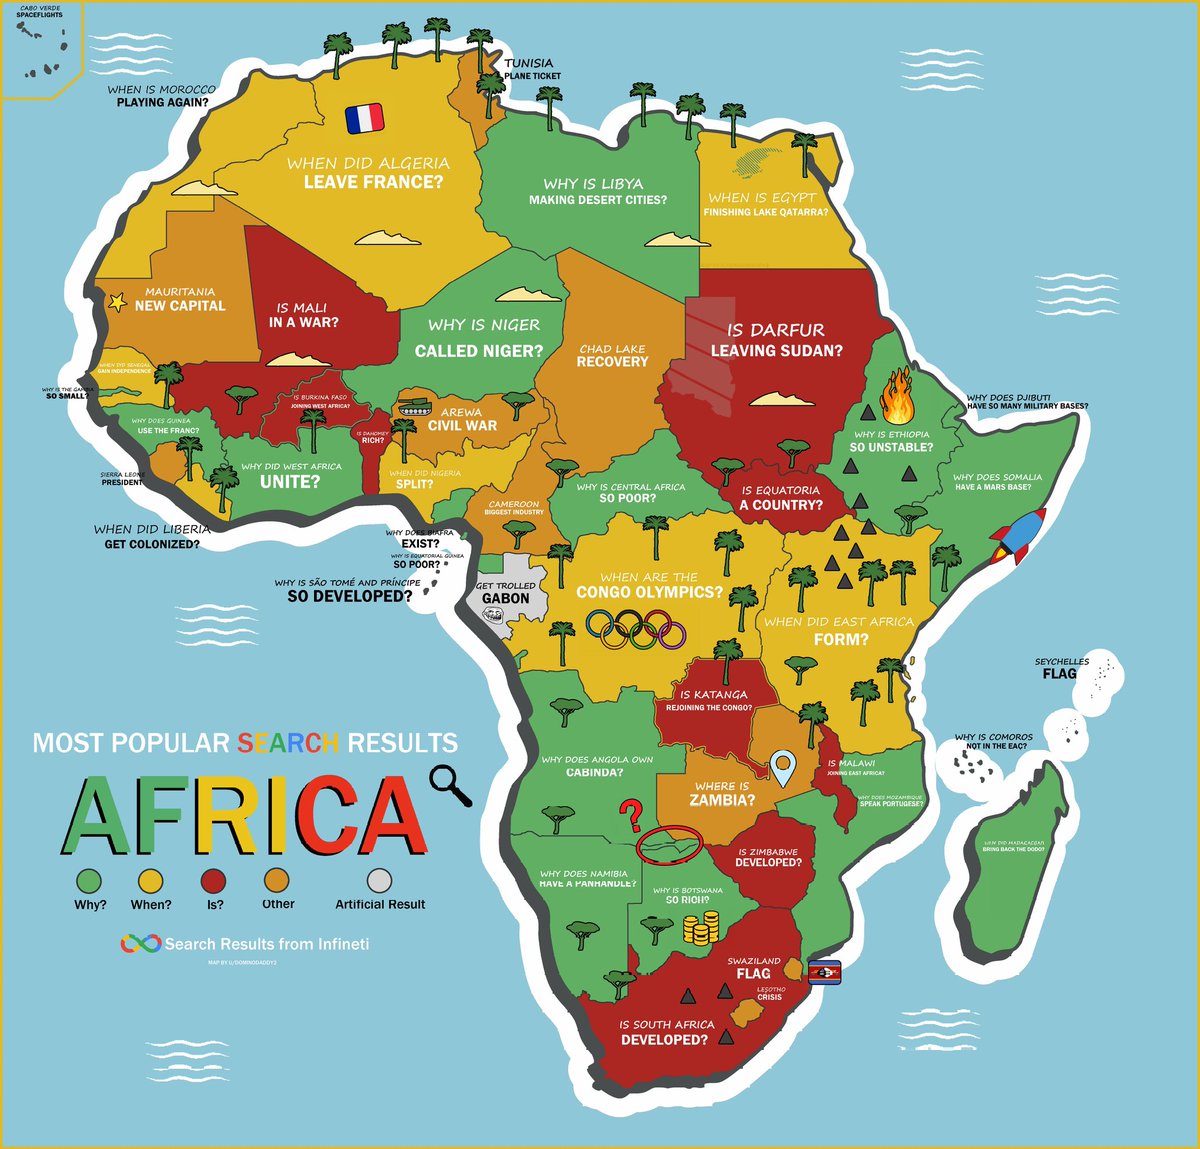 Most popular search results about each country: Africa!